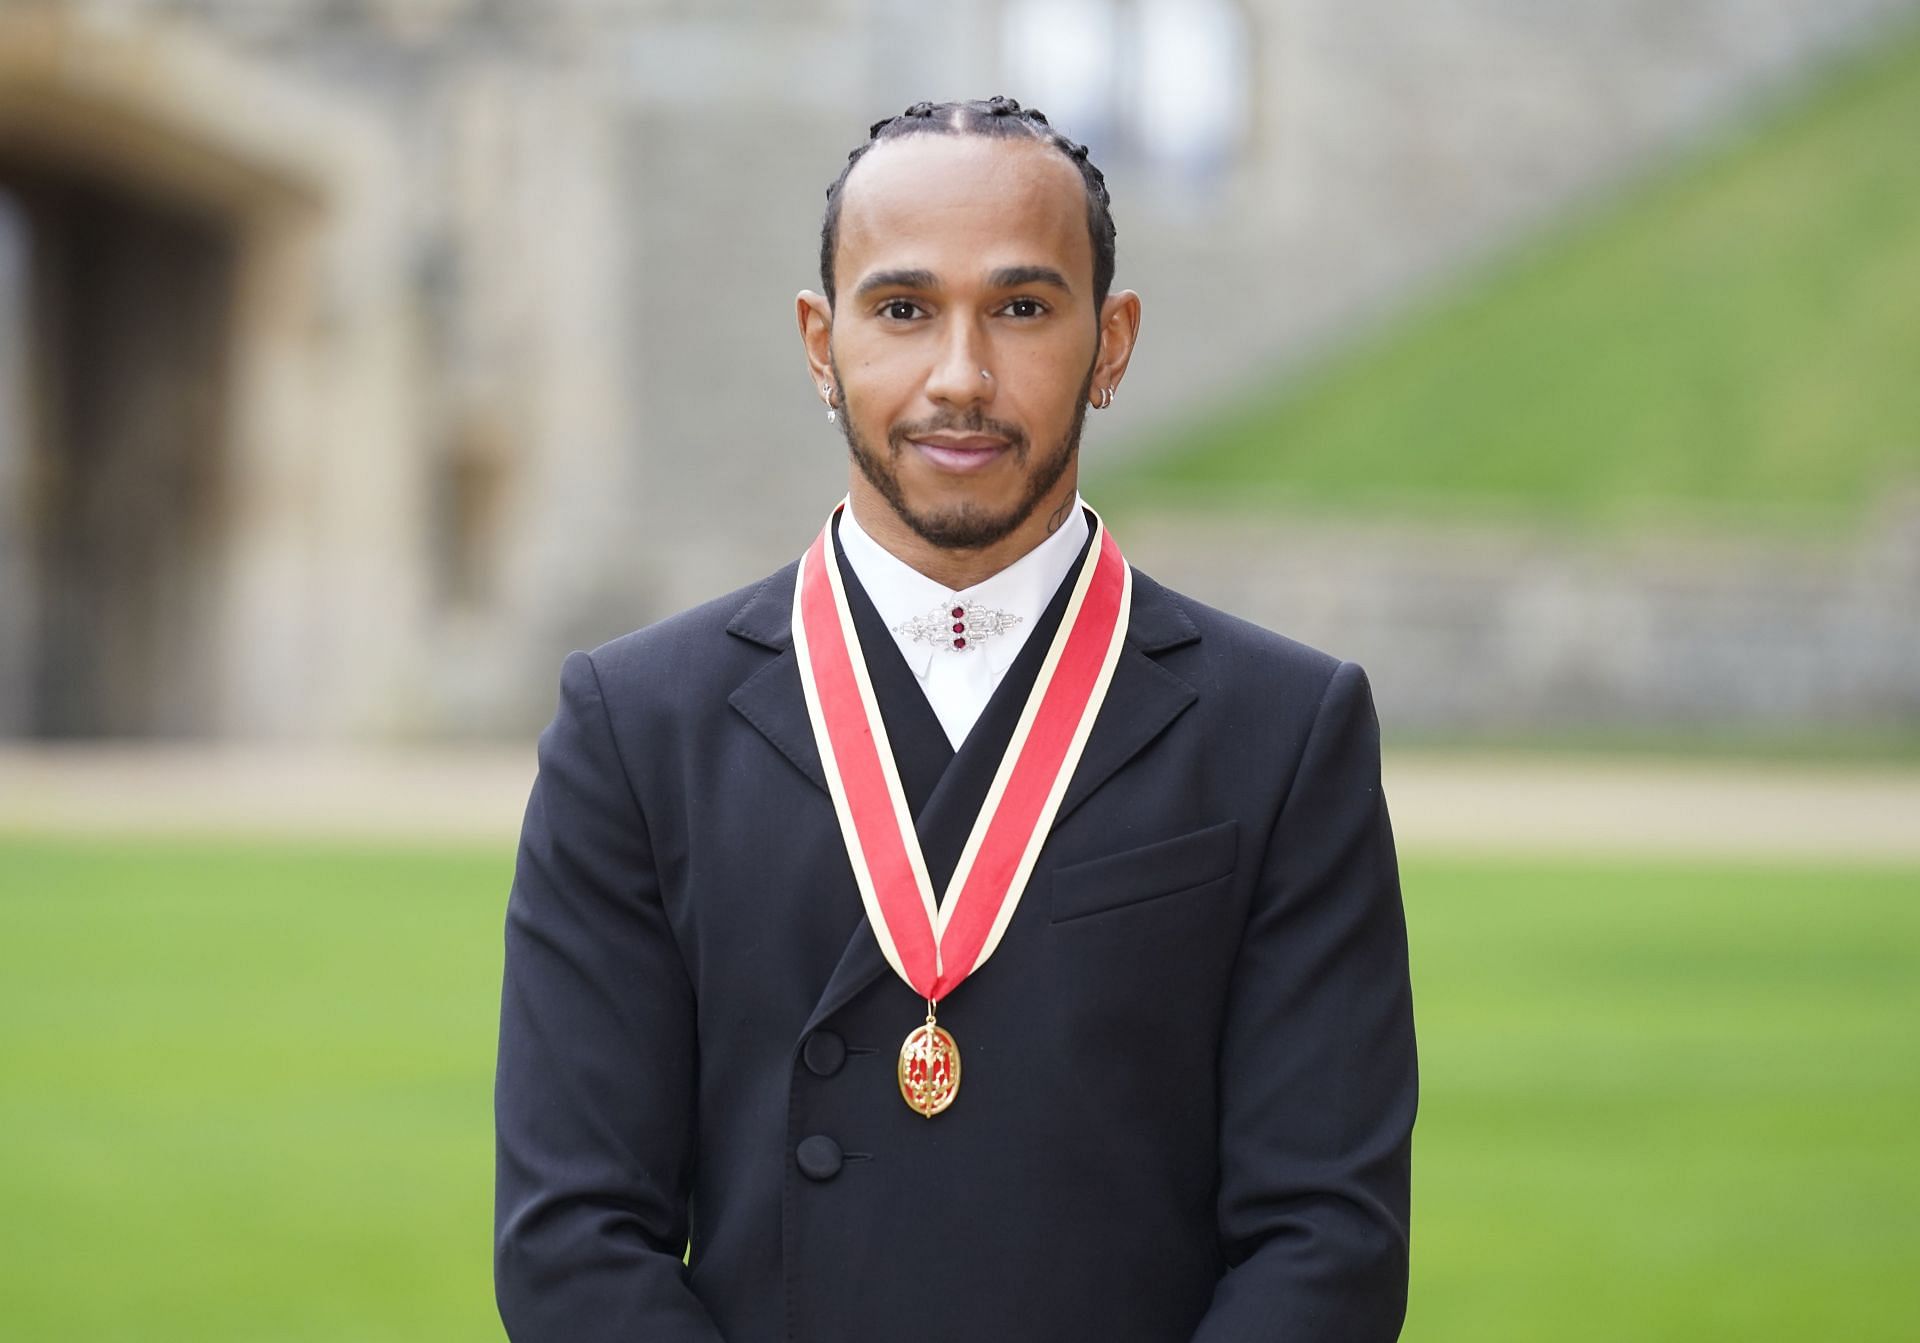 Sir Lewis Hamilton after he was made a Knight Bachelor by the Prince of Wales during a investiture ceremony at Windsor Castle on December 15, 2021 in Windsor, England. (Photo by Andrew Matthews - WPA Pool/Getty Images)